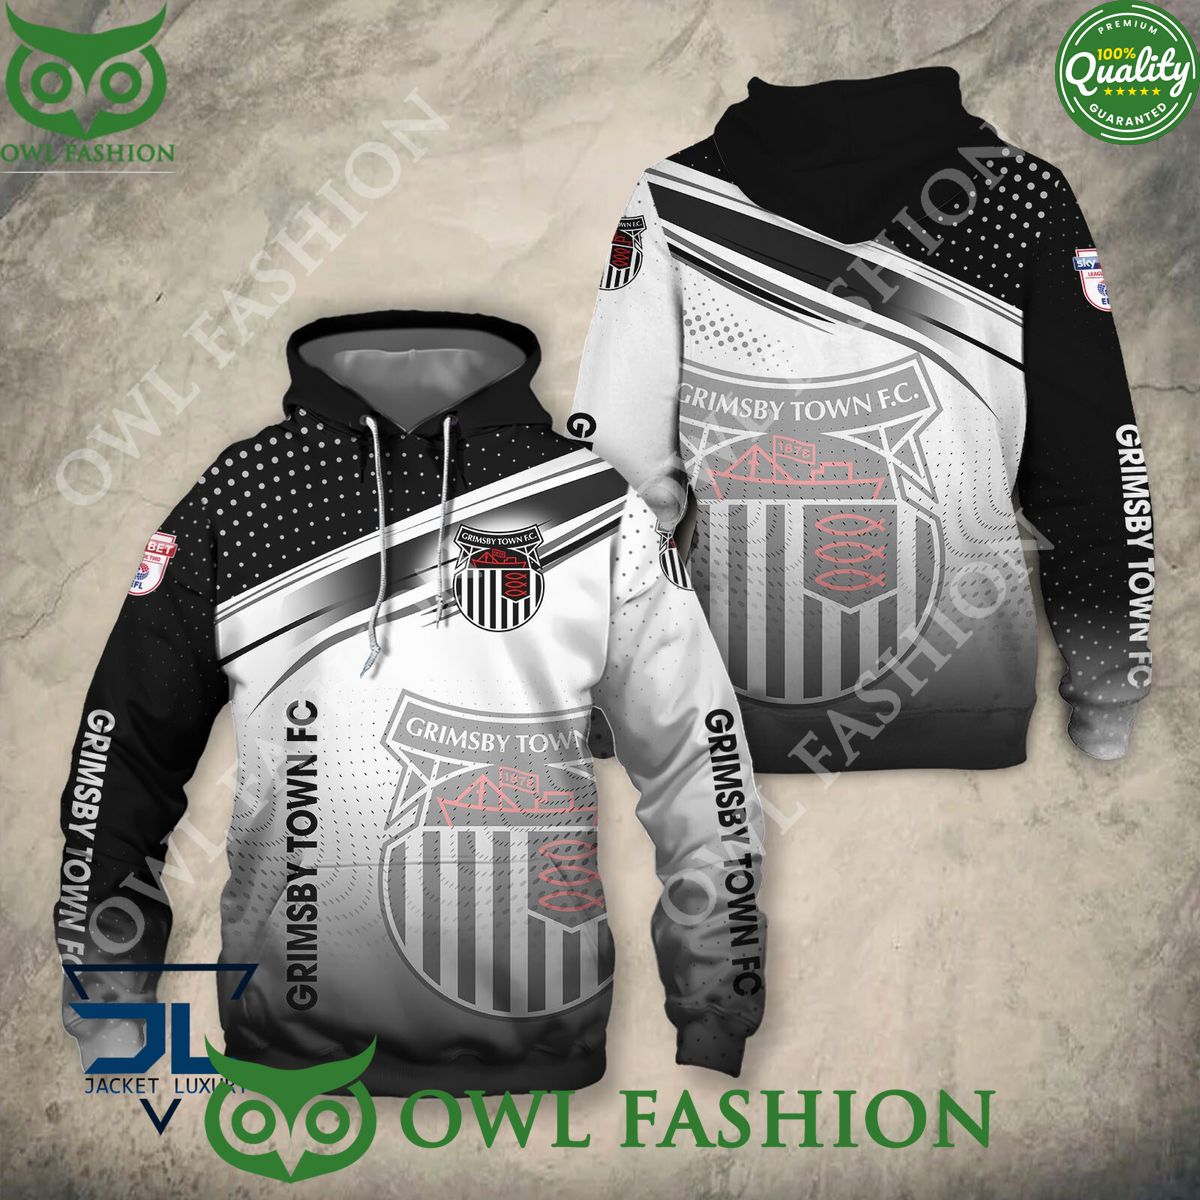 Grimsby Town FC EFL League Two Hoodie Shirt Coolosm